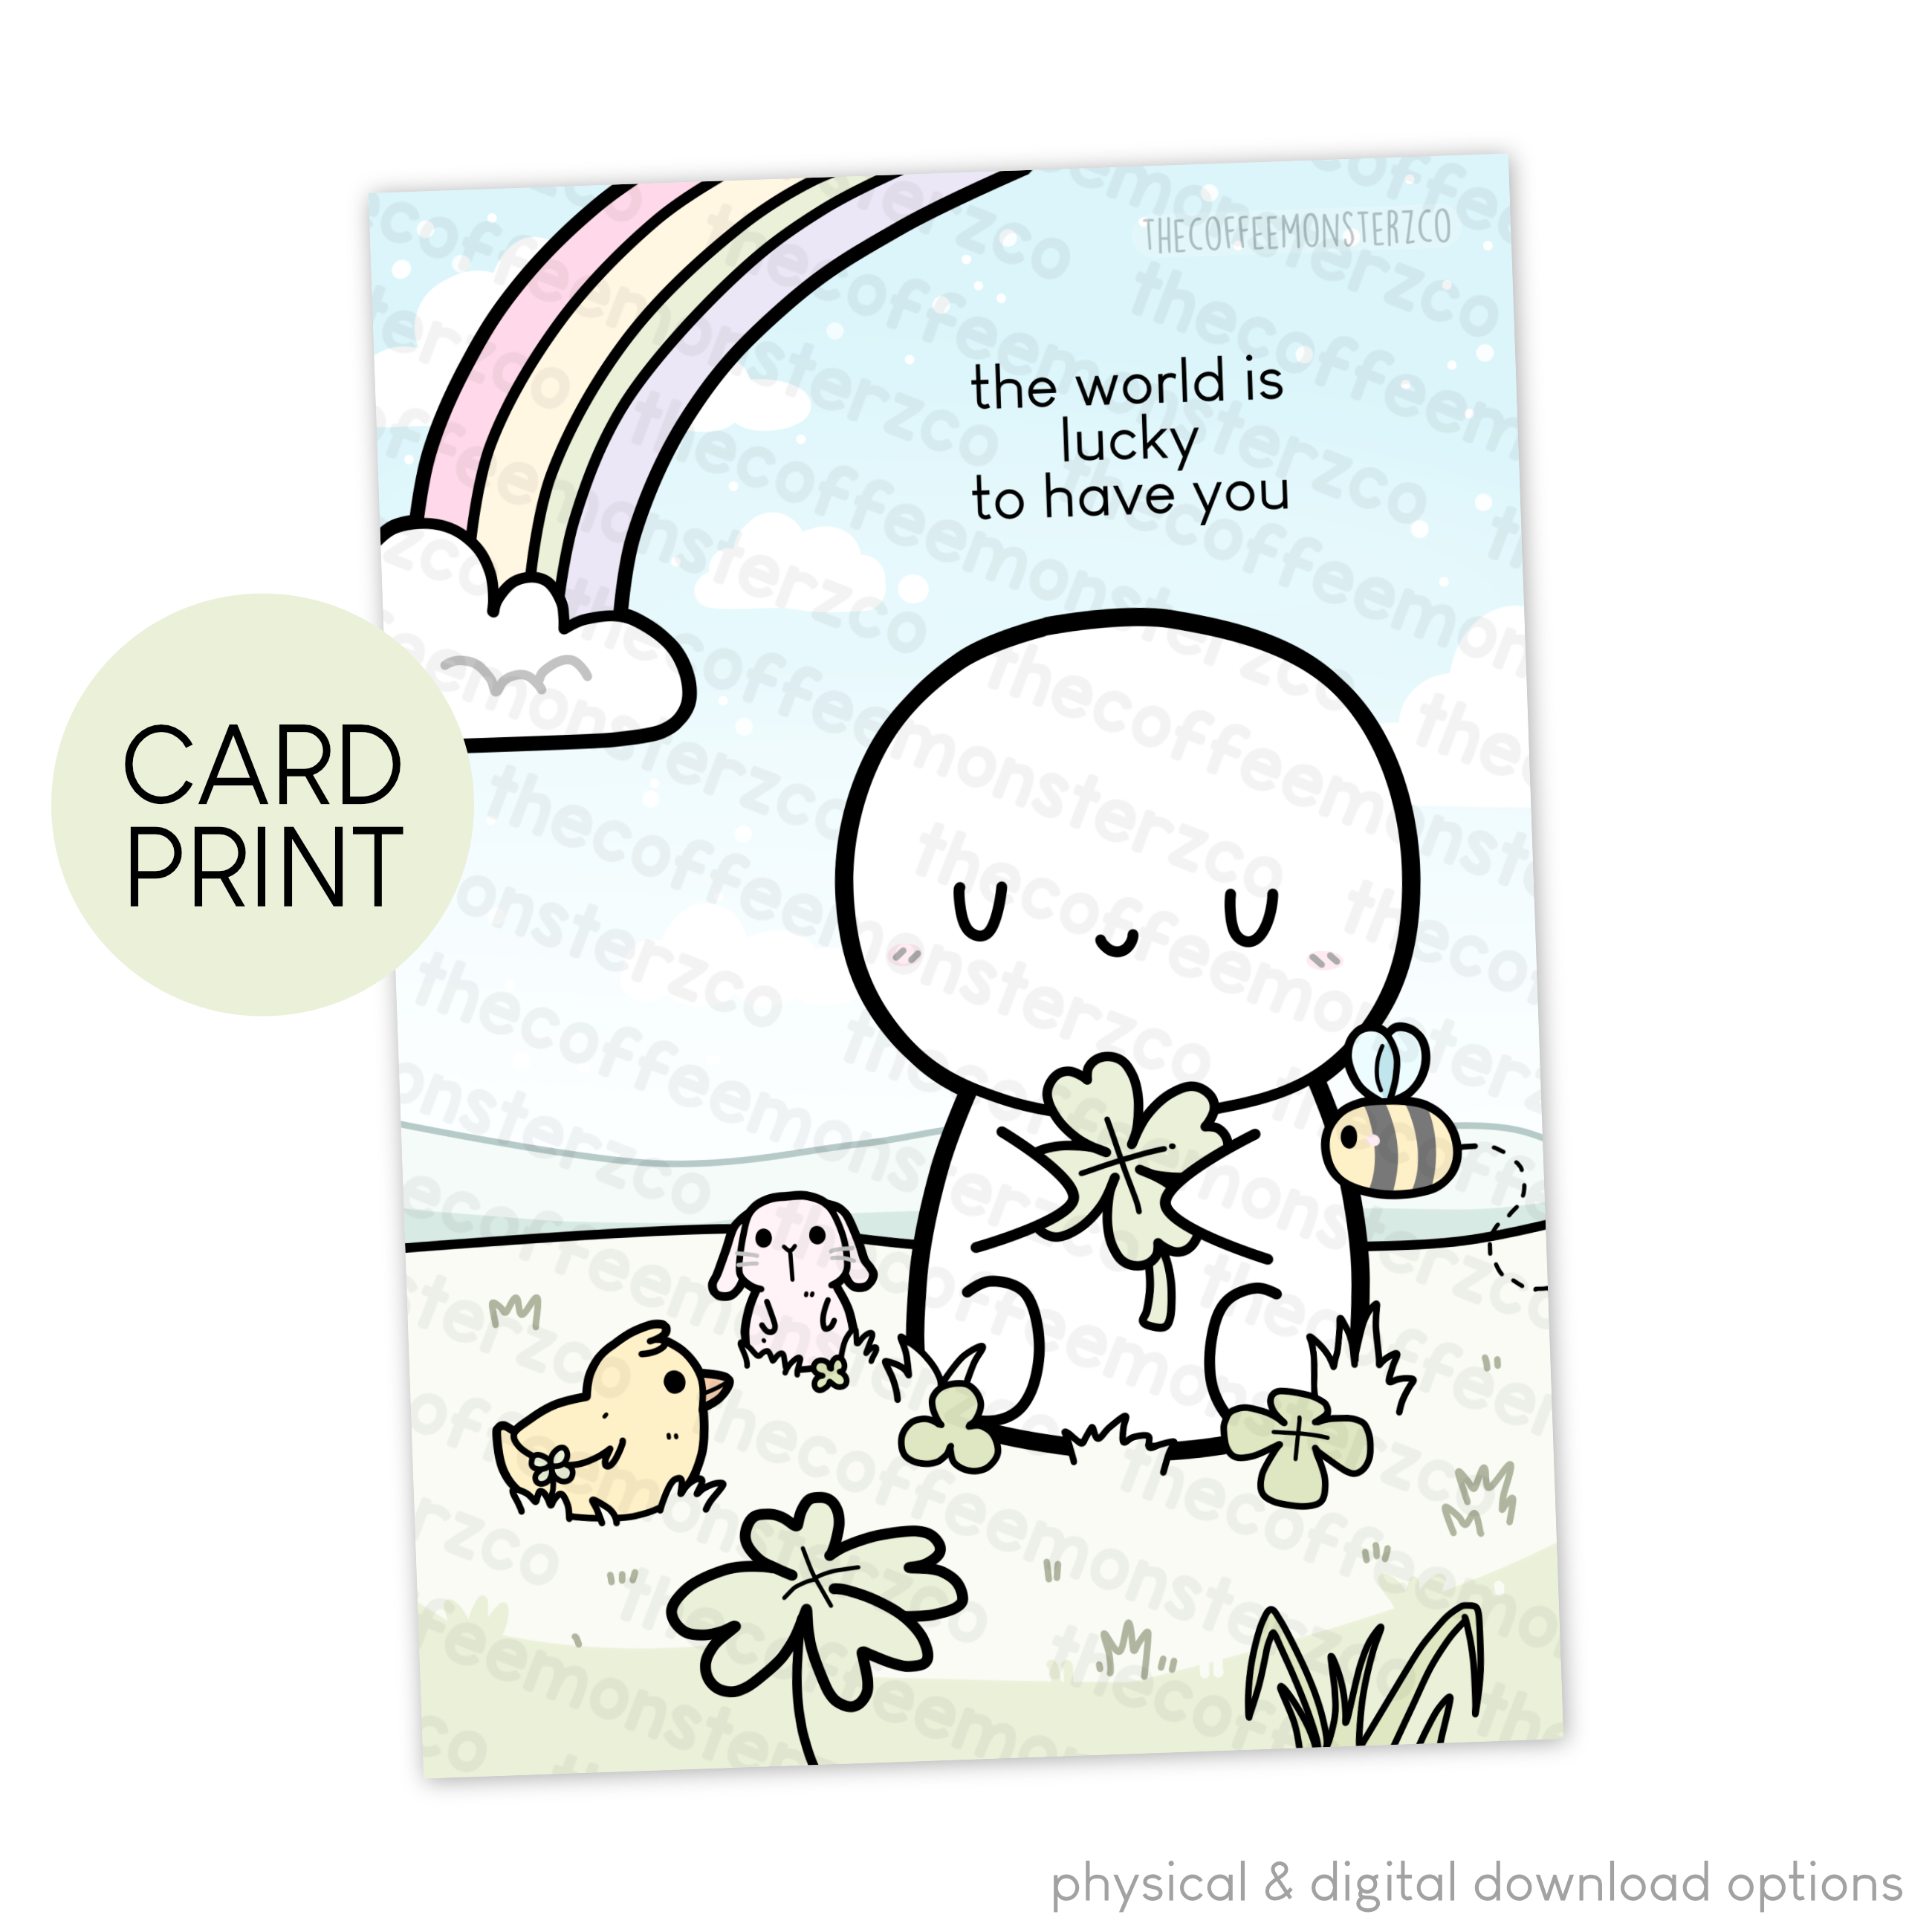 The World Is Lucky To Have You - Card Print